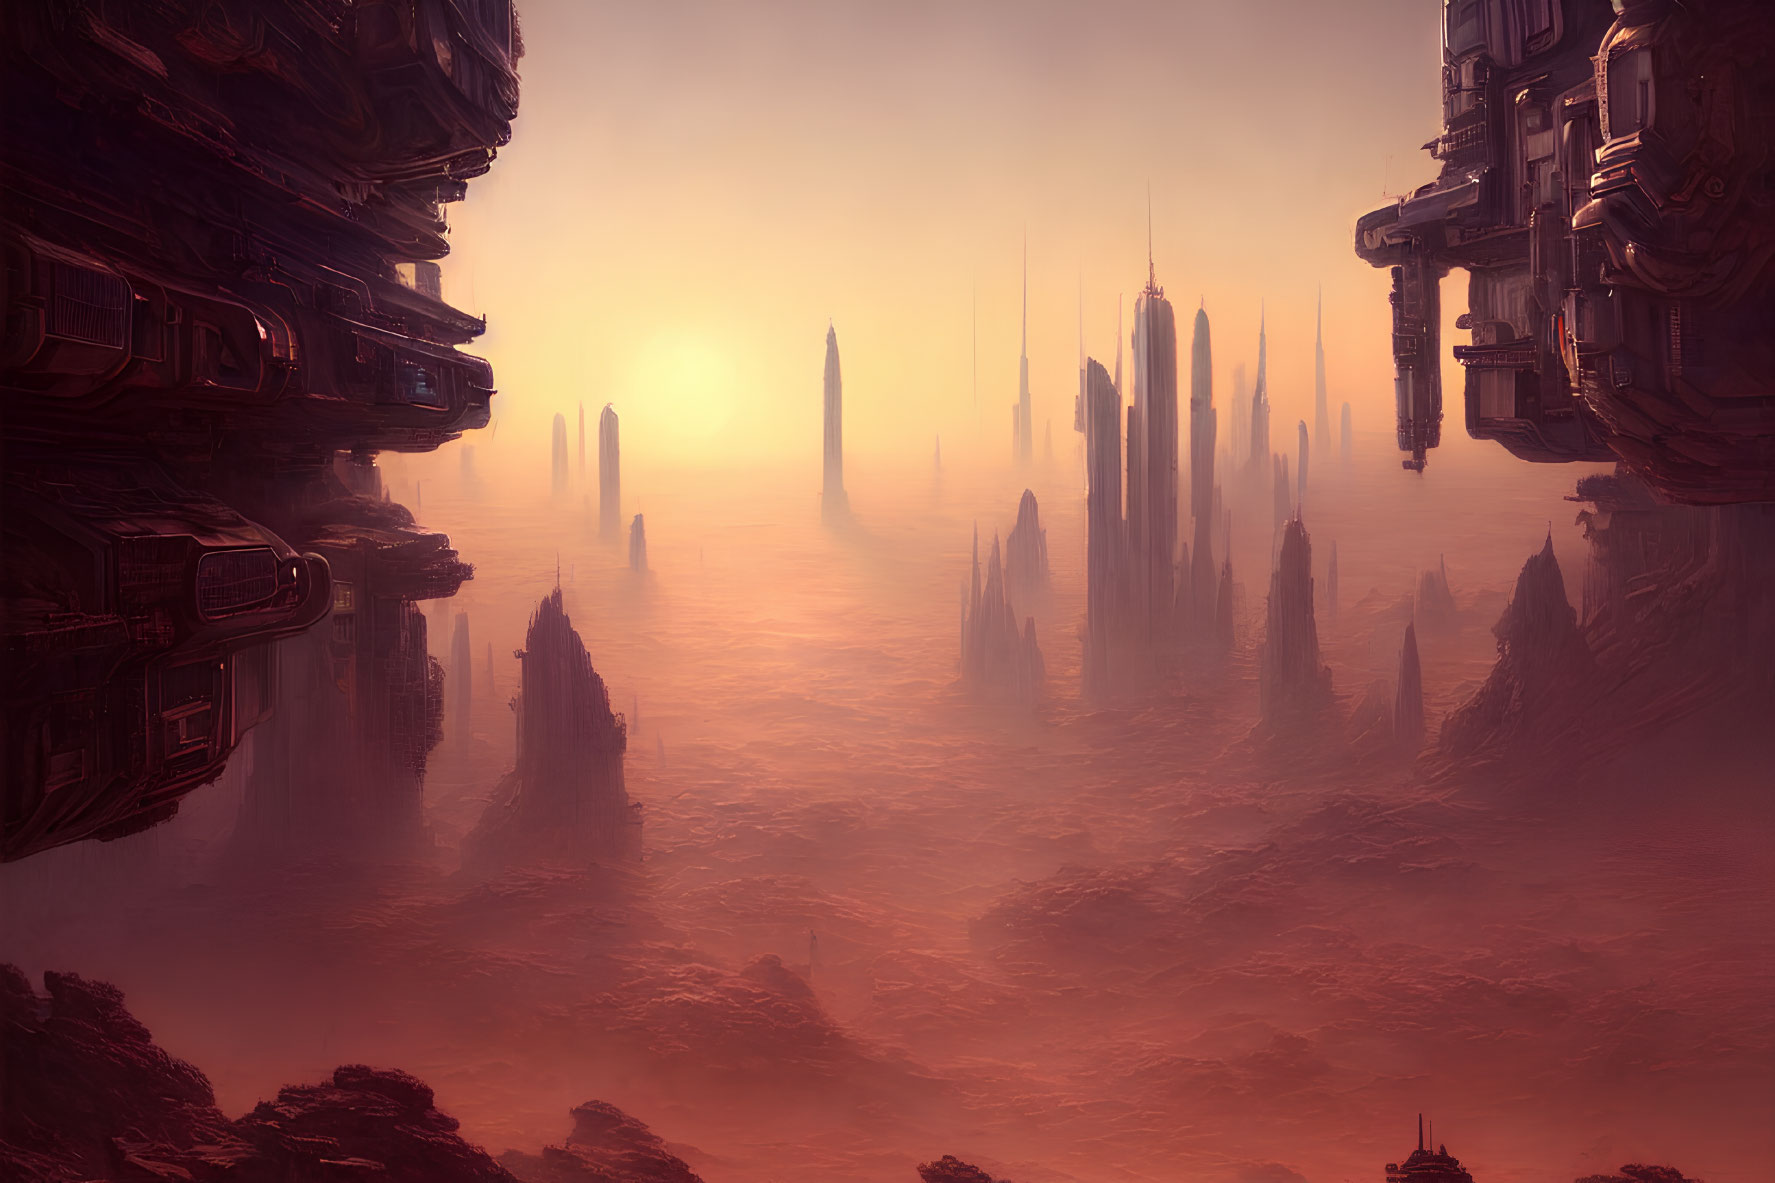 Futuristic cityscape with towering skyscrapers in hazy orange atmosphere